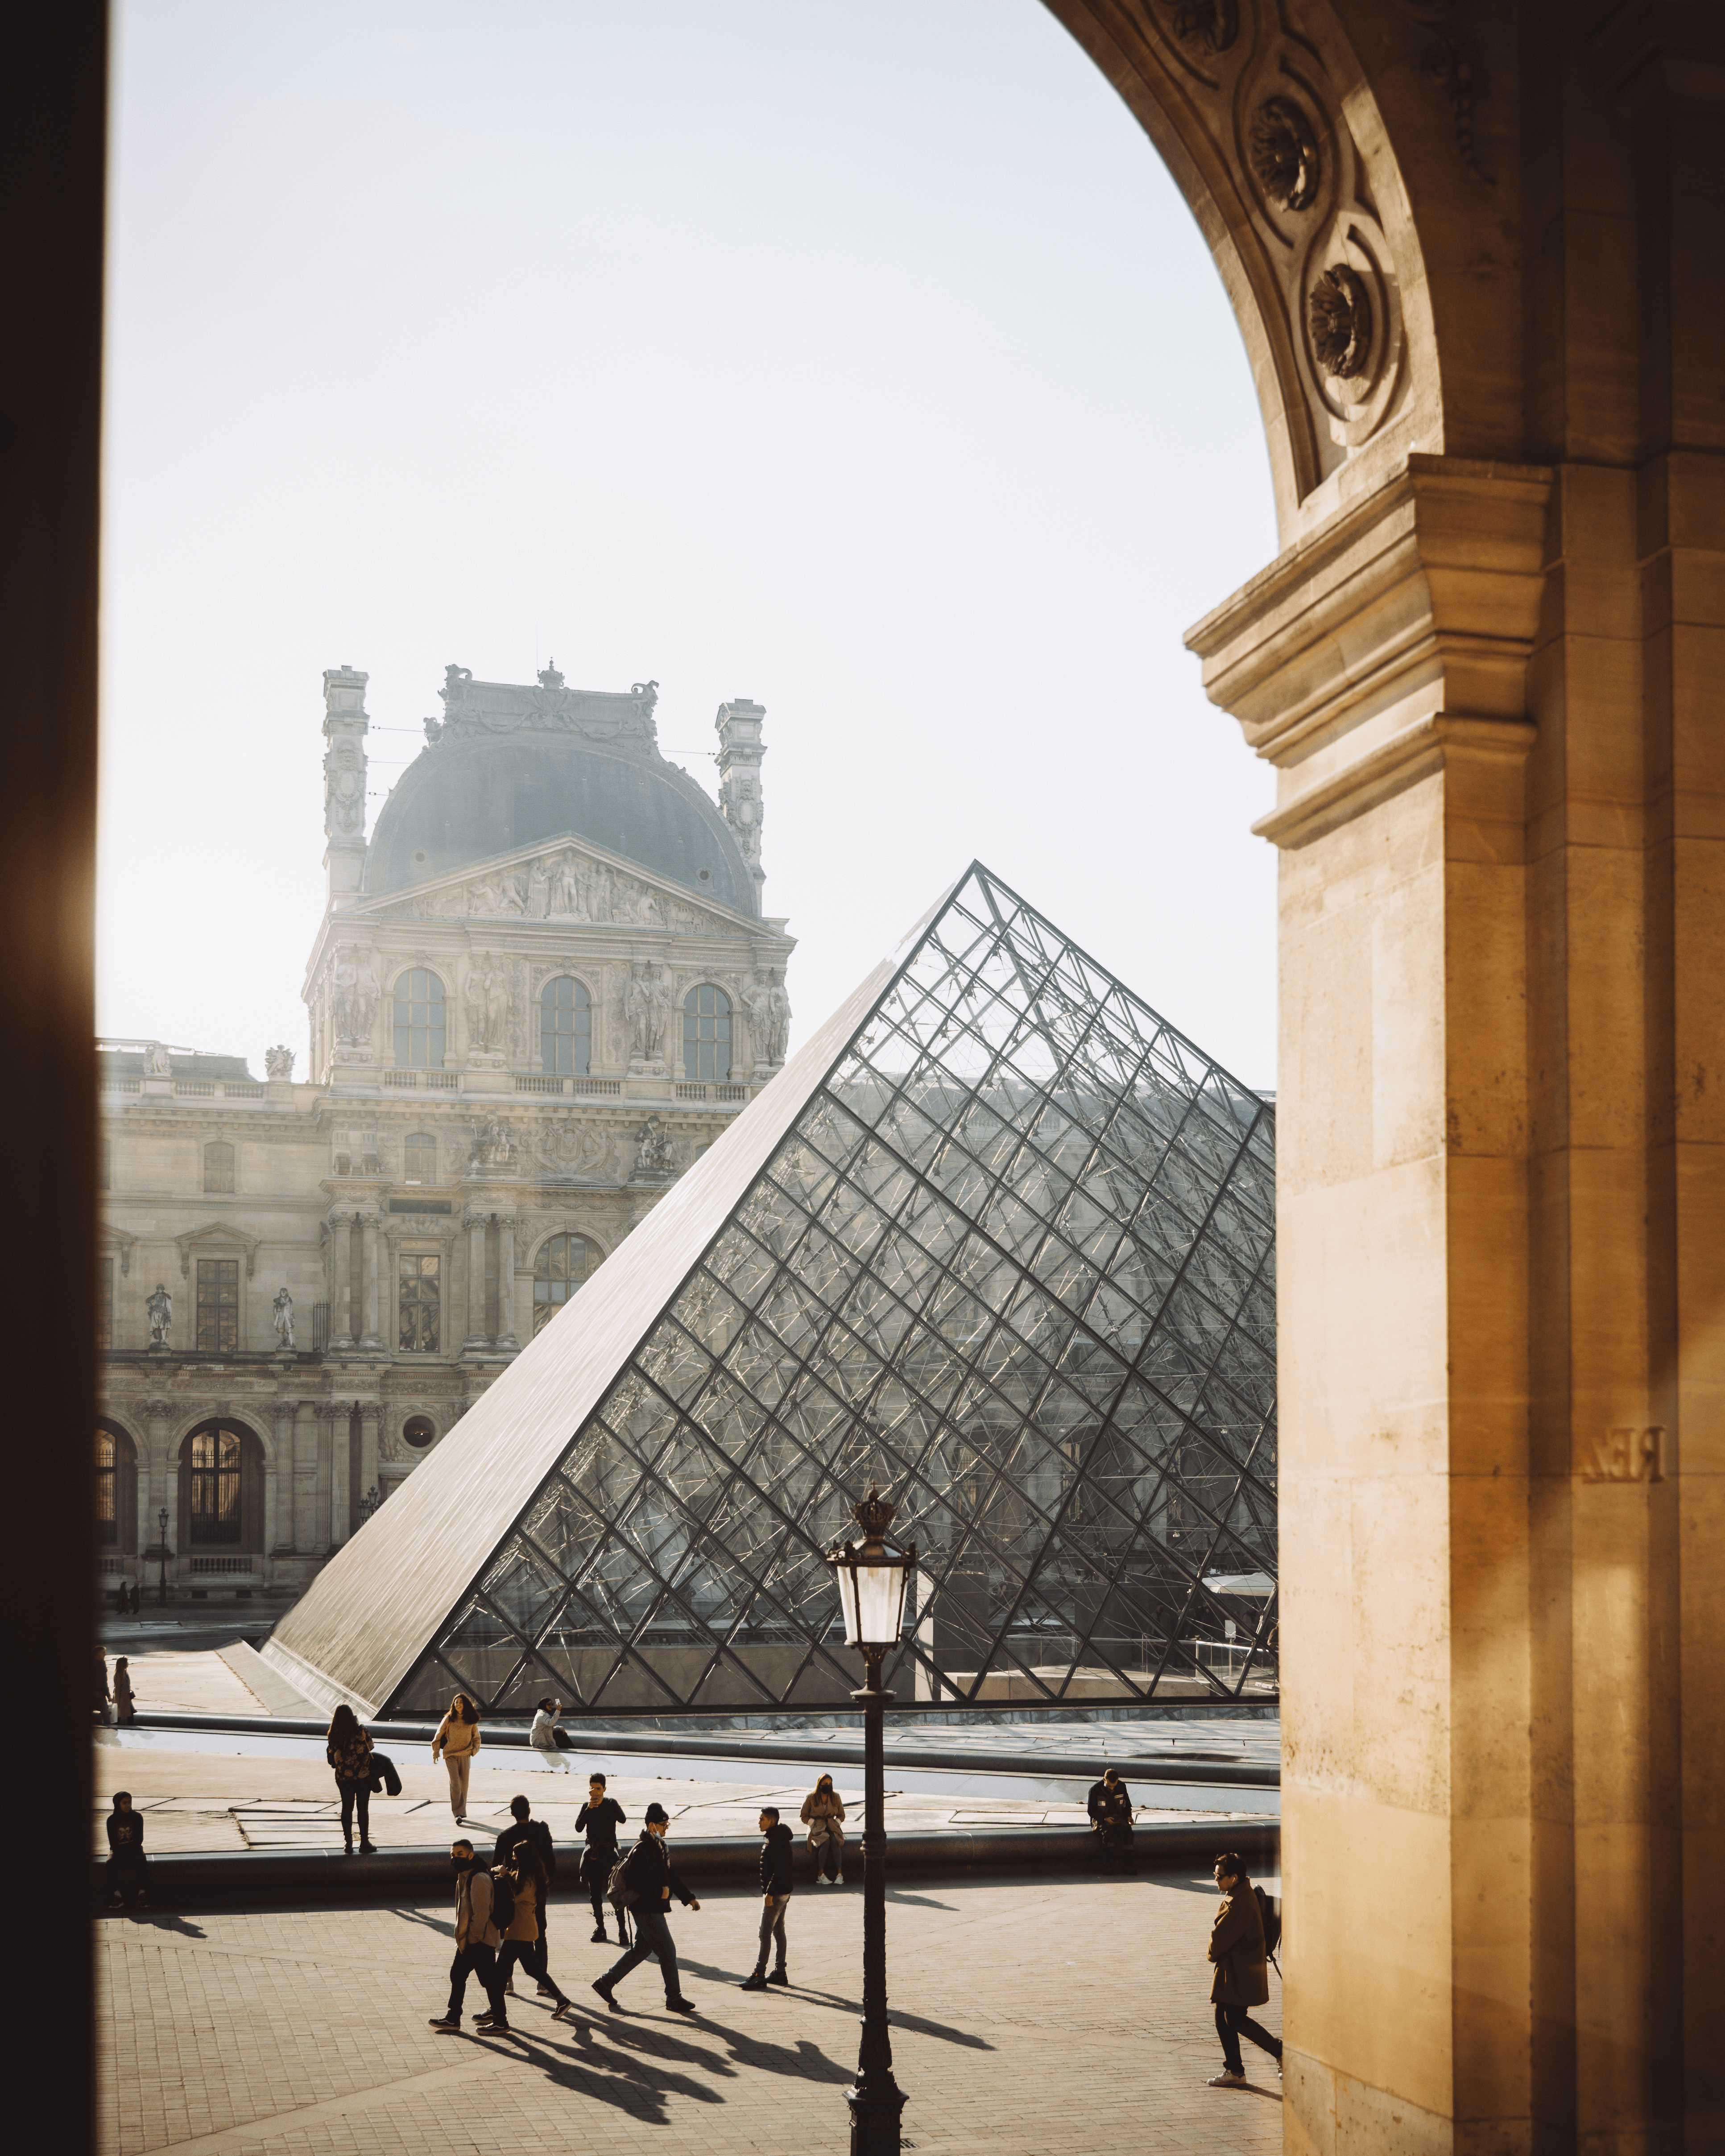 Pyramid of Louvre